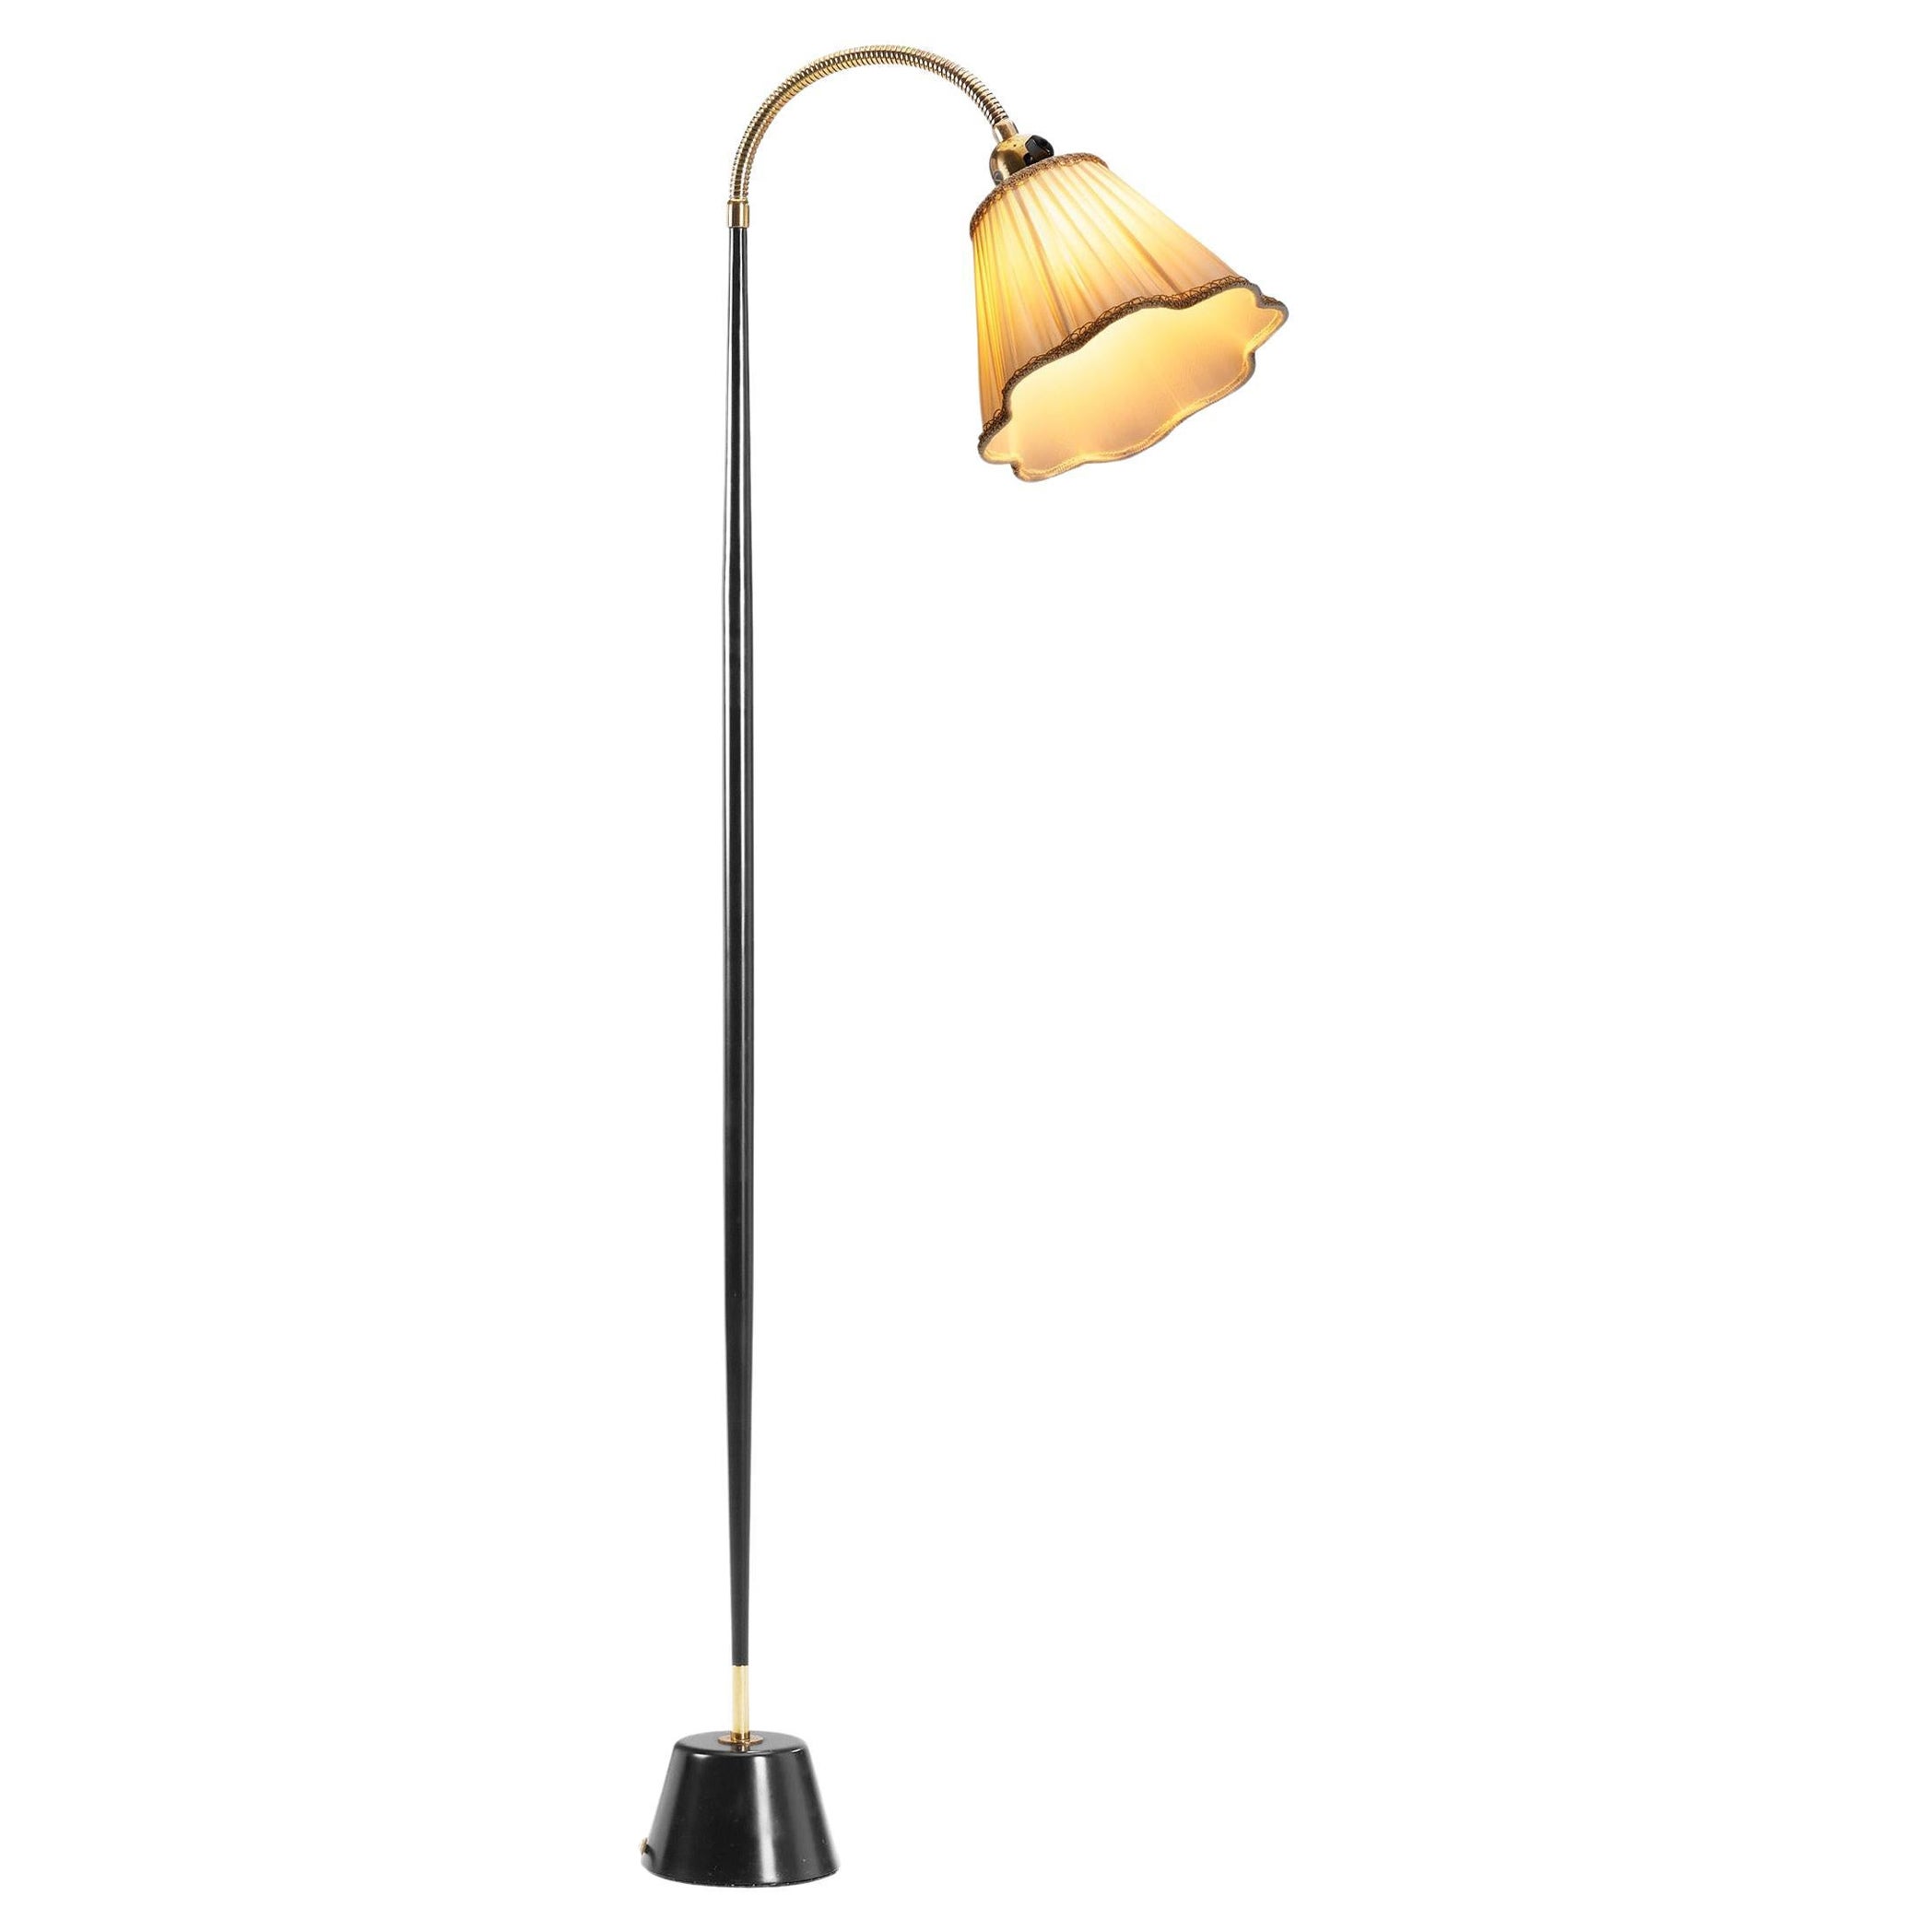 Model "741157-1" Floor Lamp by ASEA Belysning, Sweden Early 20th century For Sale